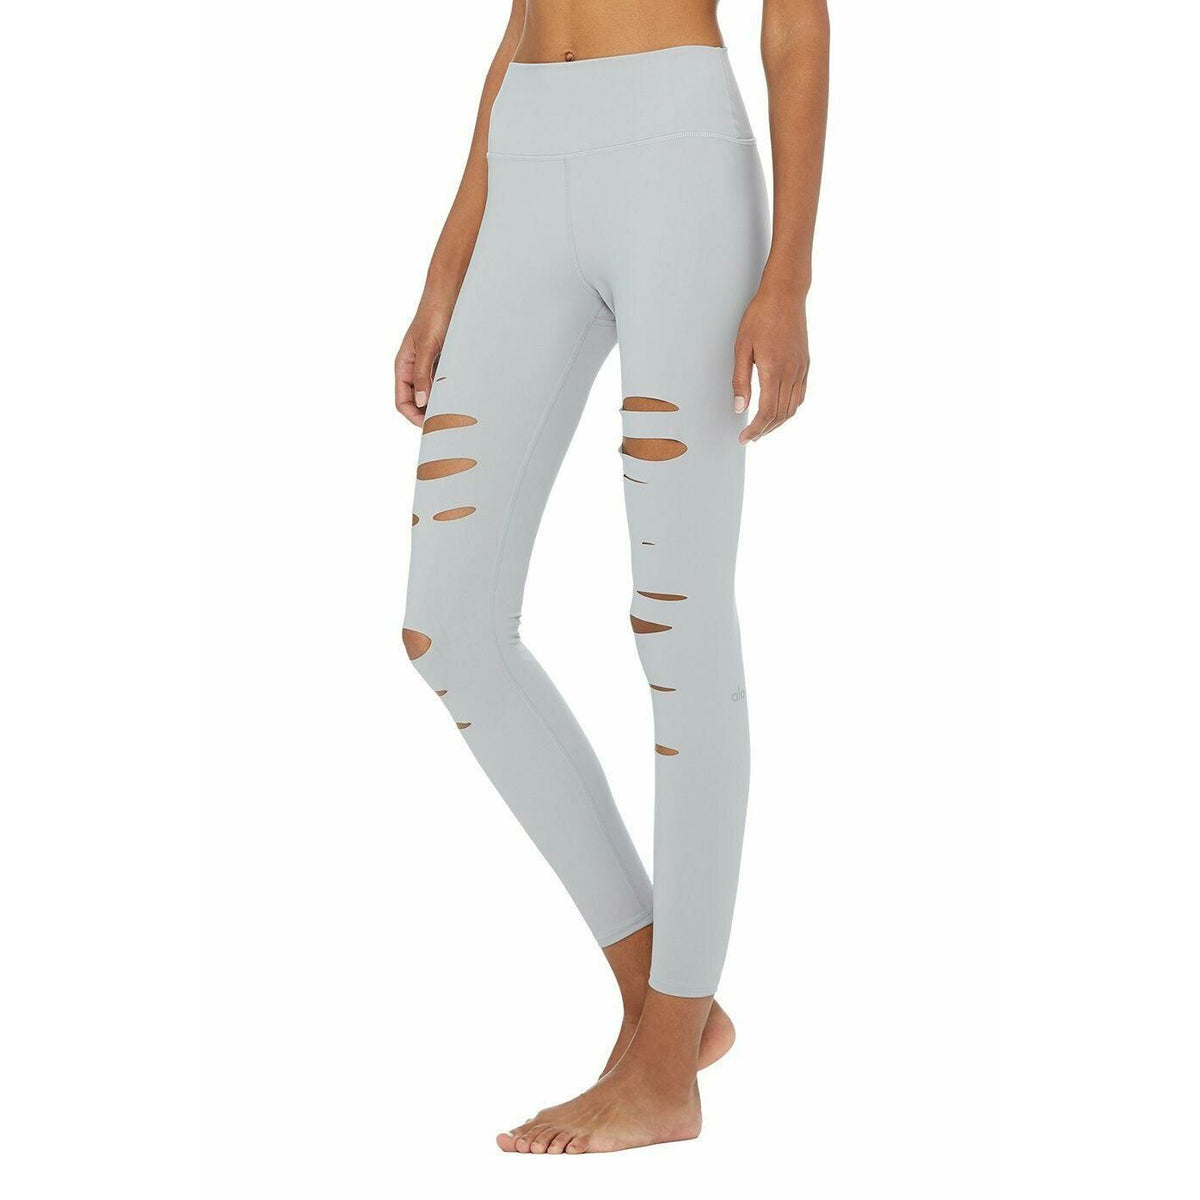 ALO YOGA HIGH-WAIST RIPPED WARRIOR LEGGING Small Anthracite $125